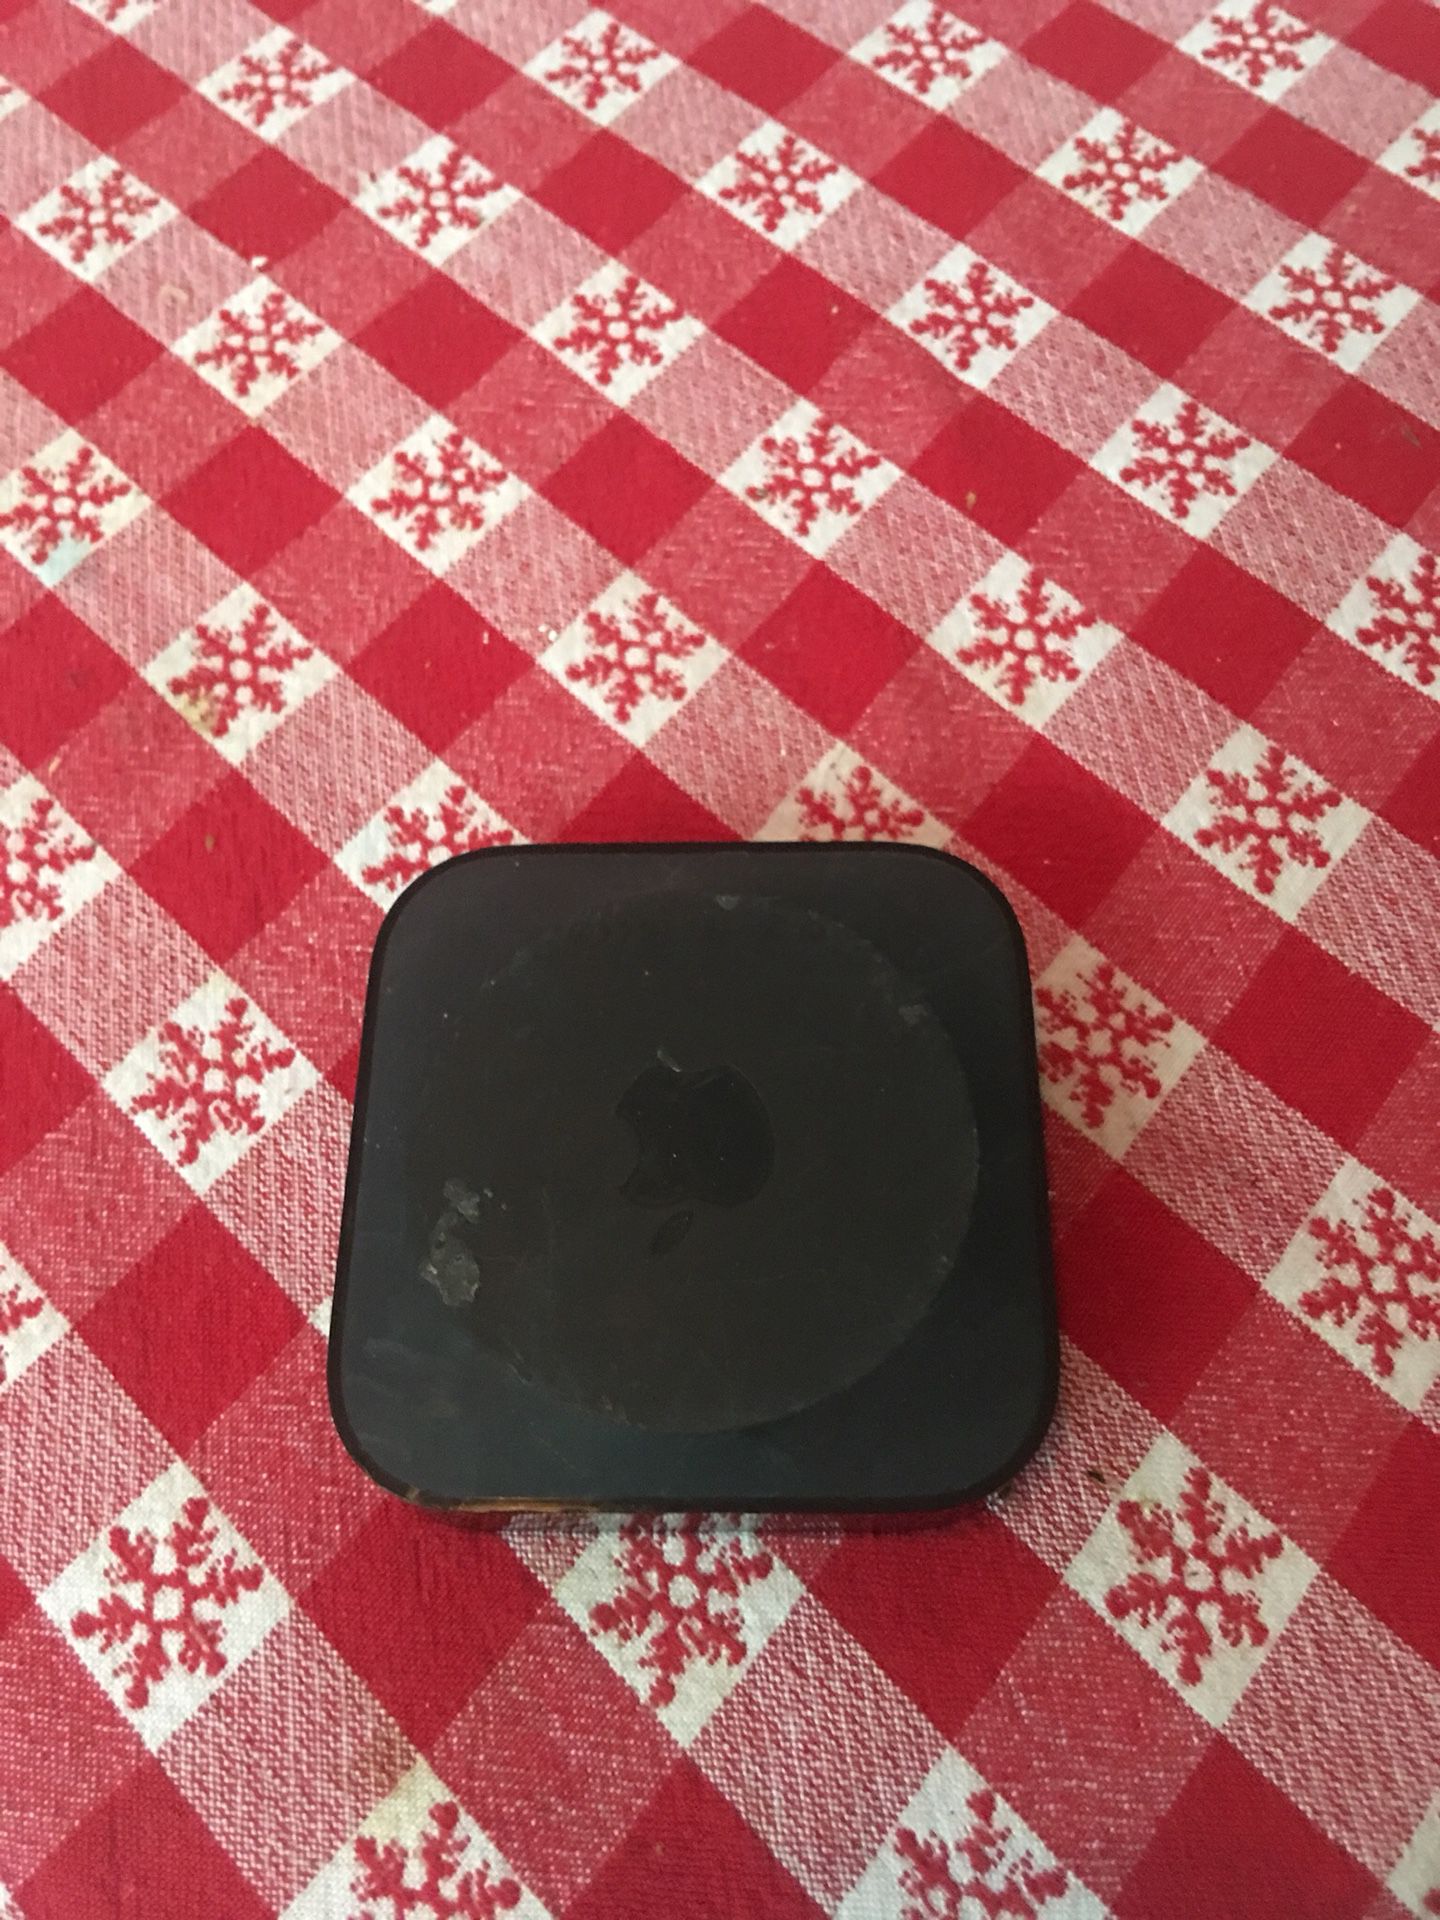 Apple TV box ( comes with a hulu account)